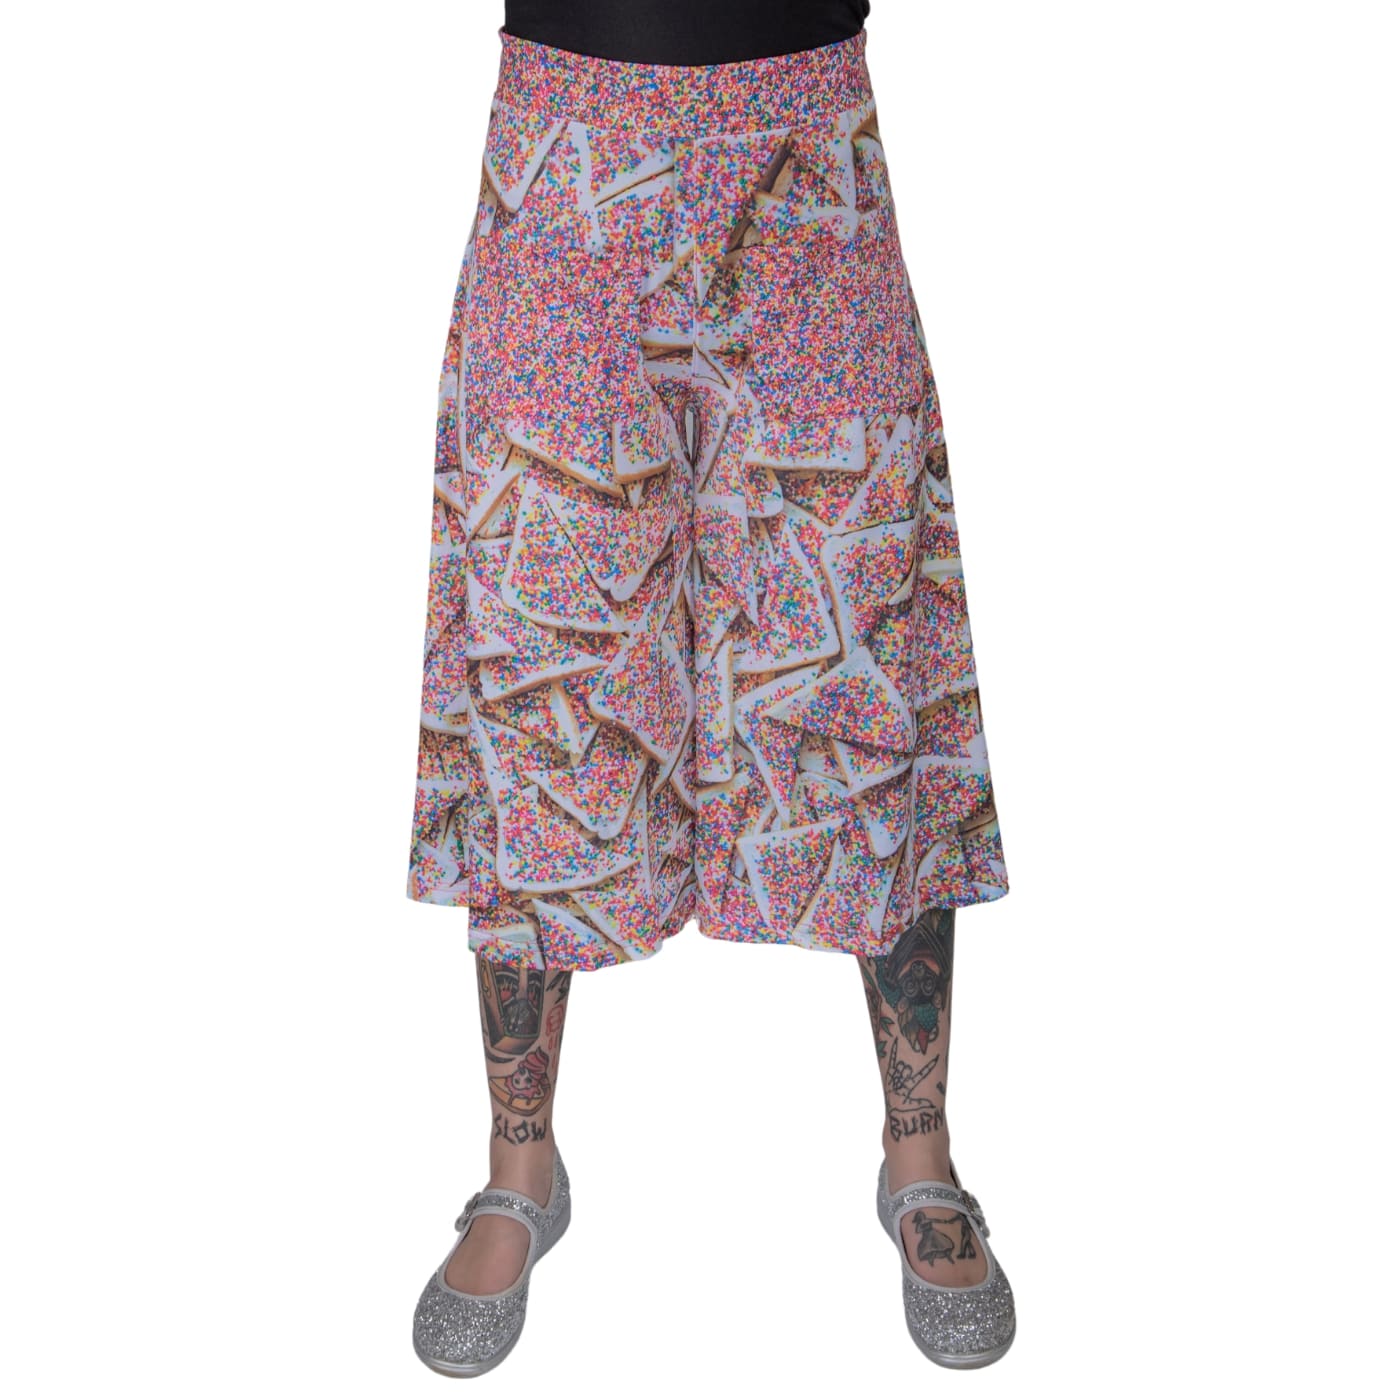 Sprinkles Culottes by RainbowsAndFairies.com.au (Fairy Bread - 100s & 1000s - Party Food - Wide Leg Pants - 3 Quarter Pants - Kitsch - Vintage Inspired) - SKU: CL_CULTS_SPRNK_ORG - Pic-01